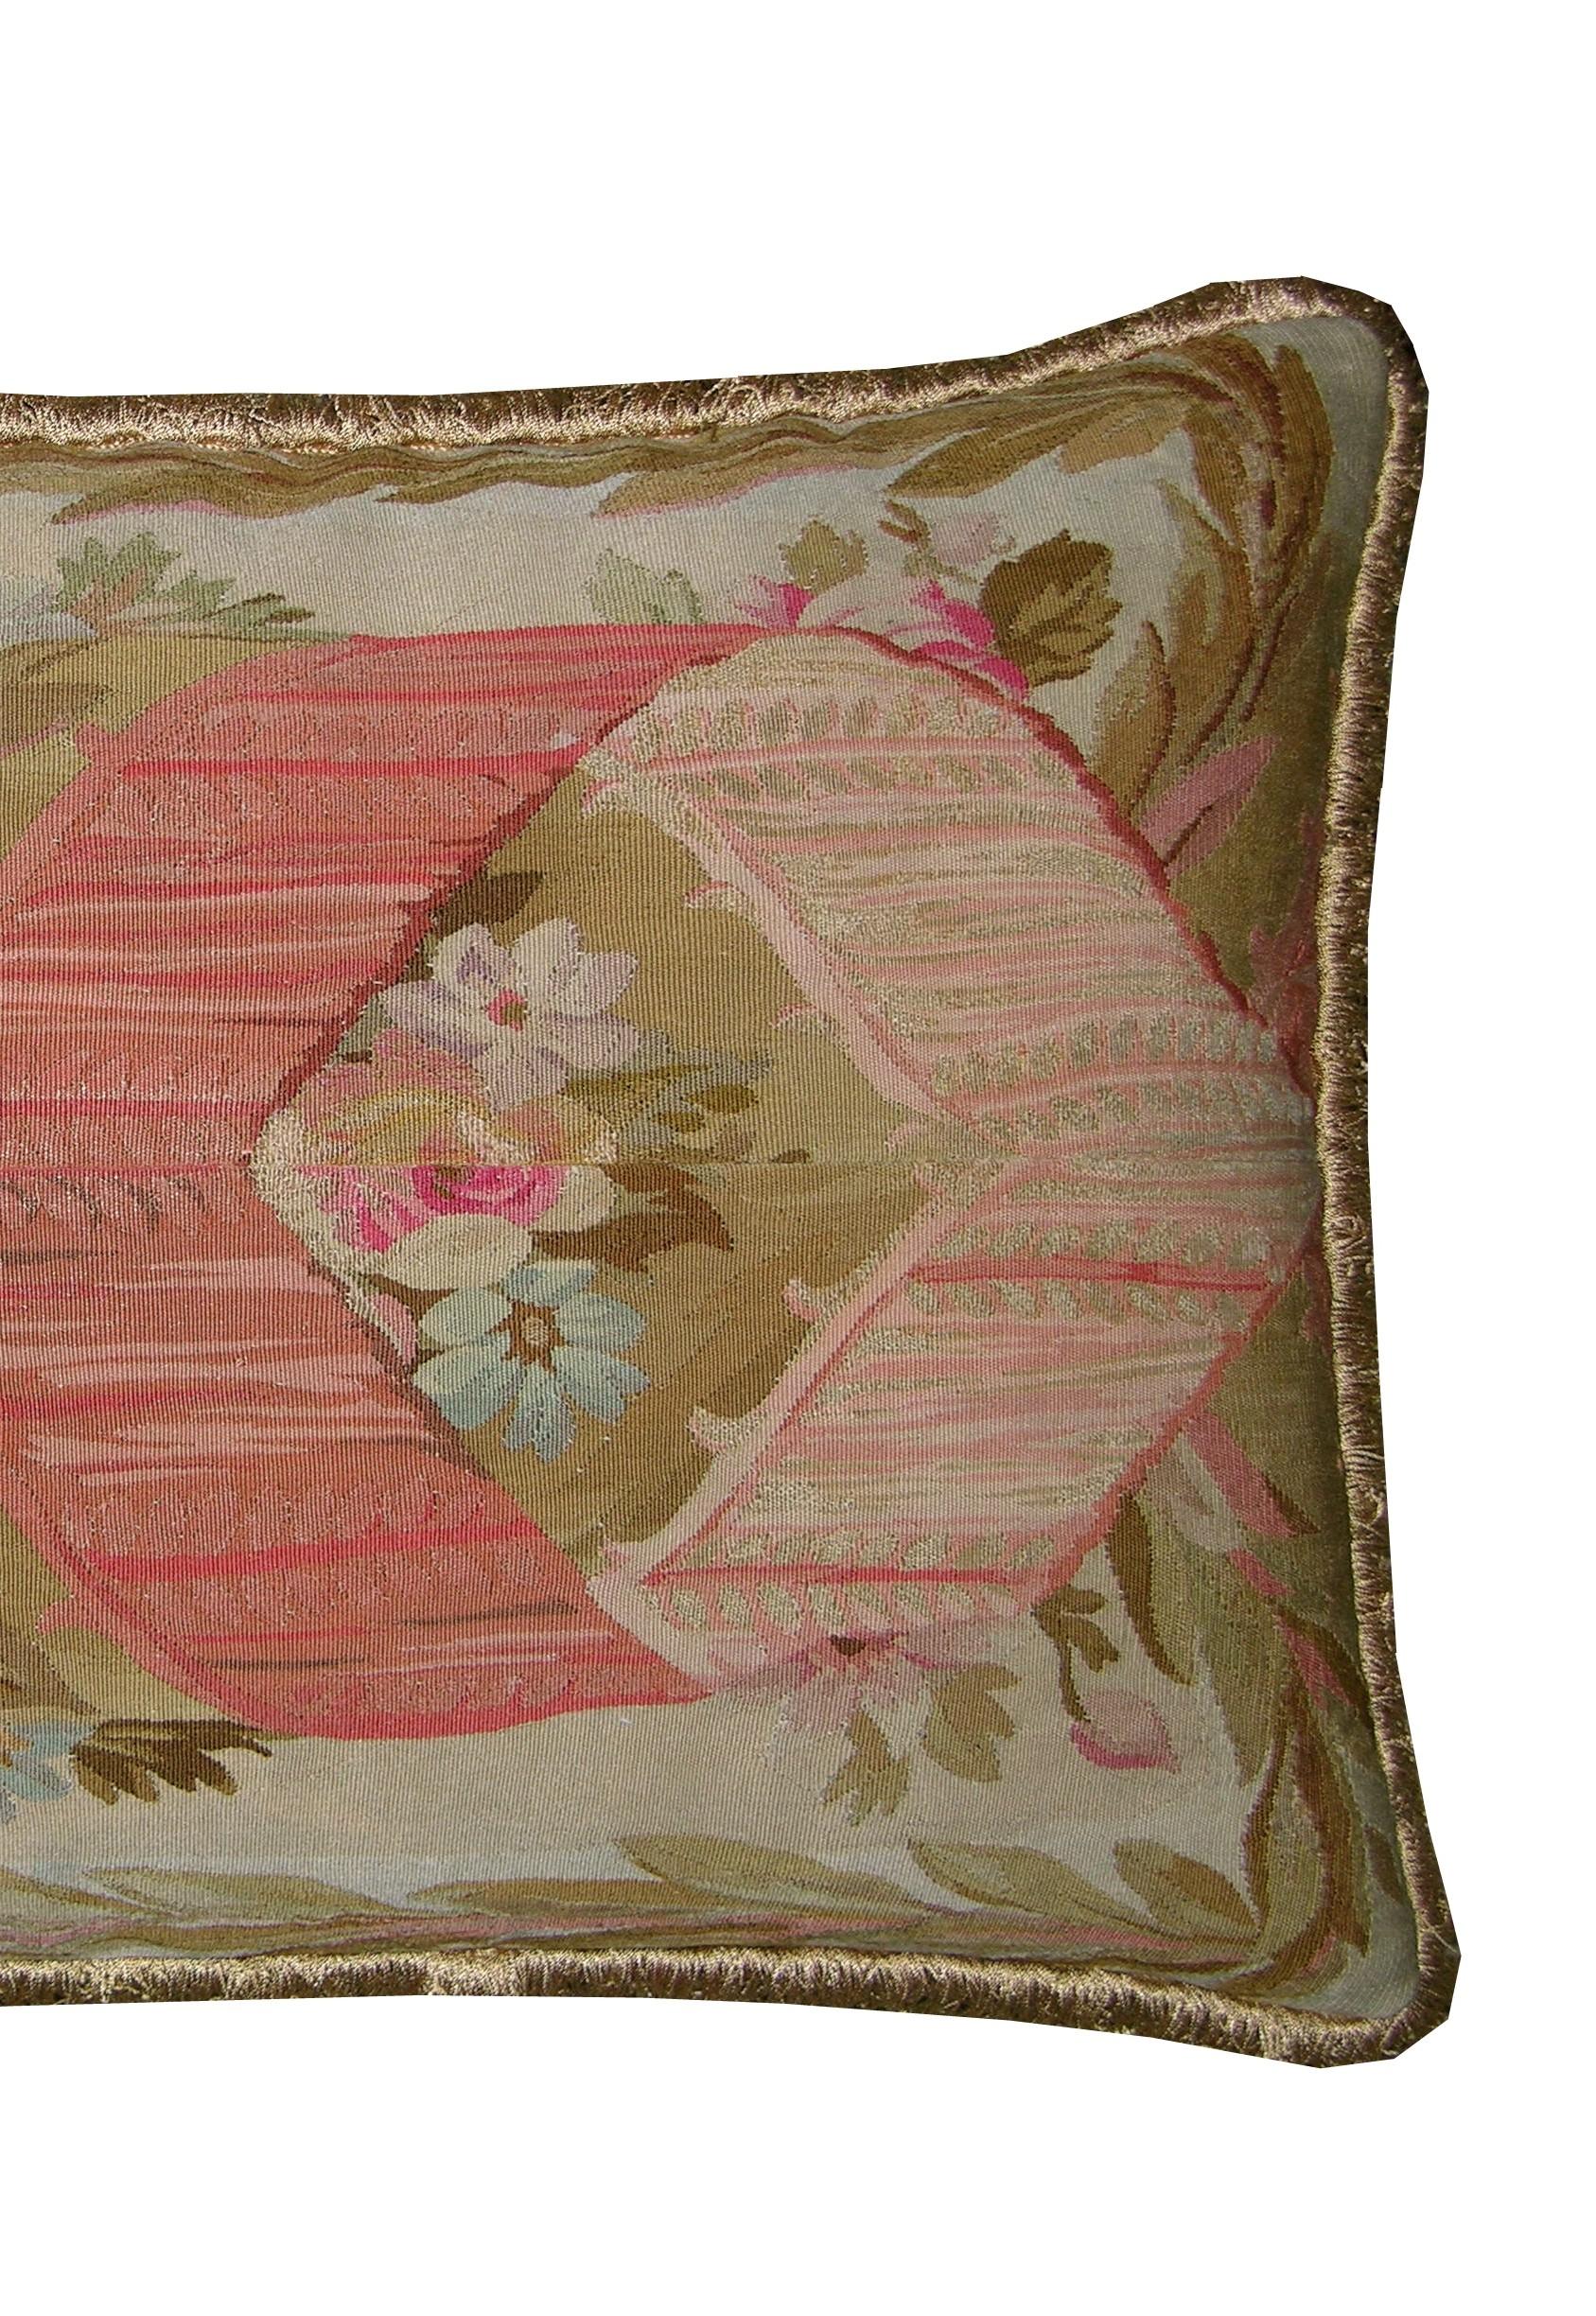 Empire Circa 1860 Antique French Aubusson Pillow For Sale